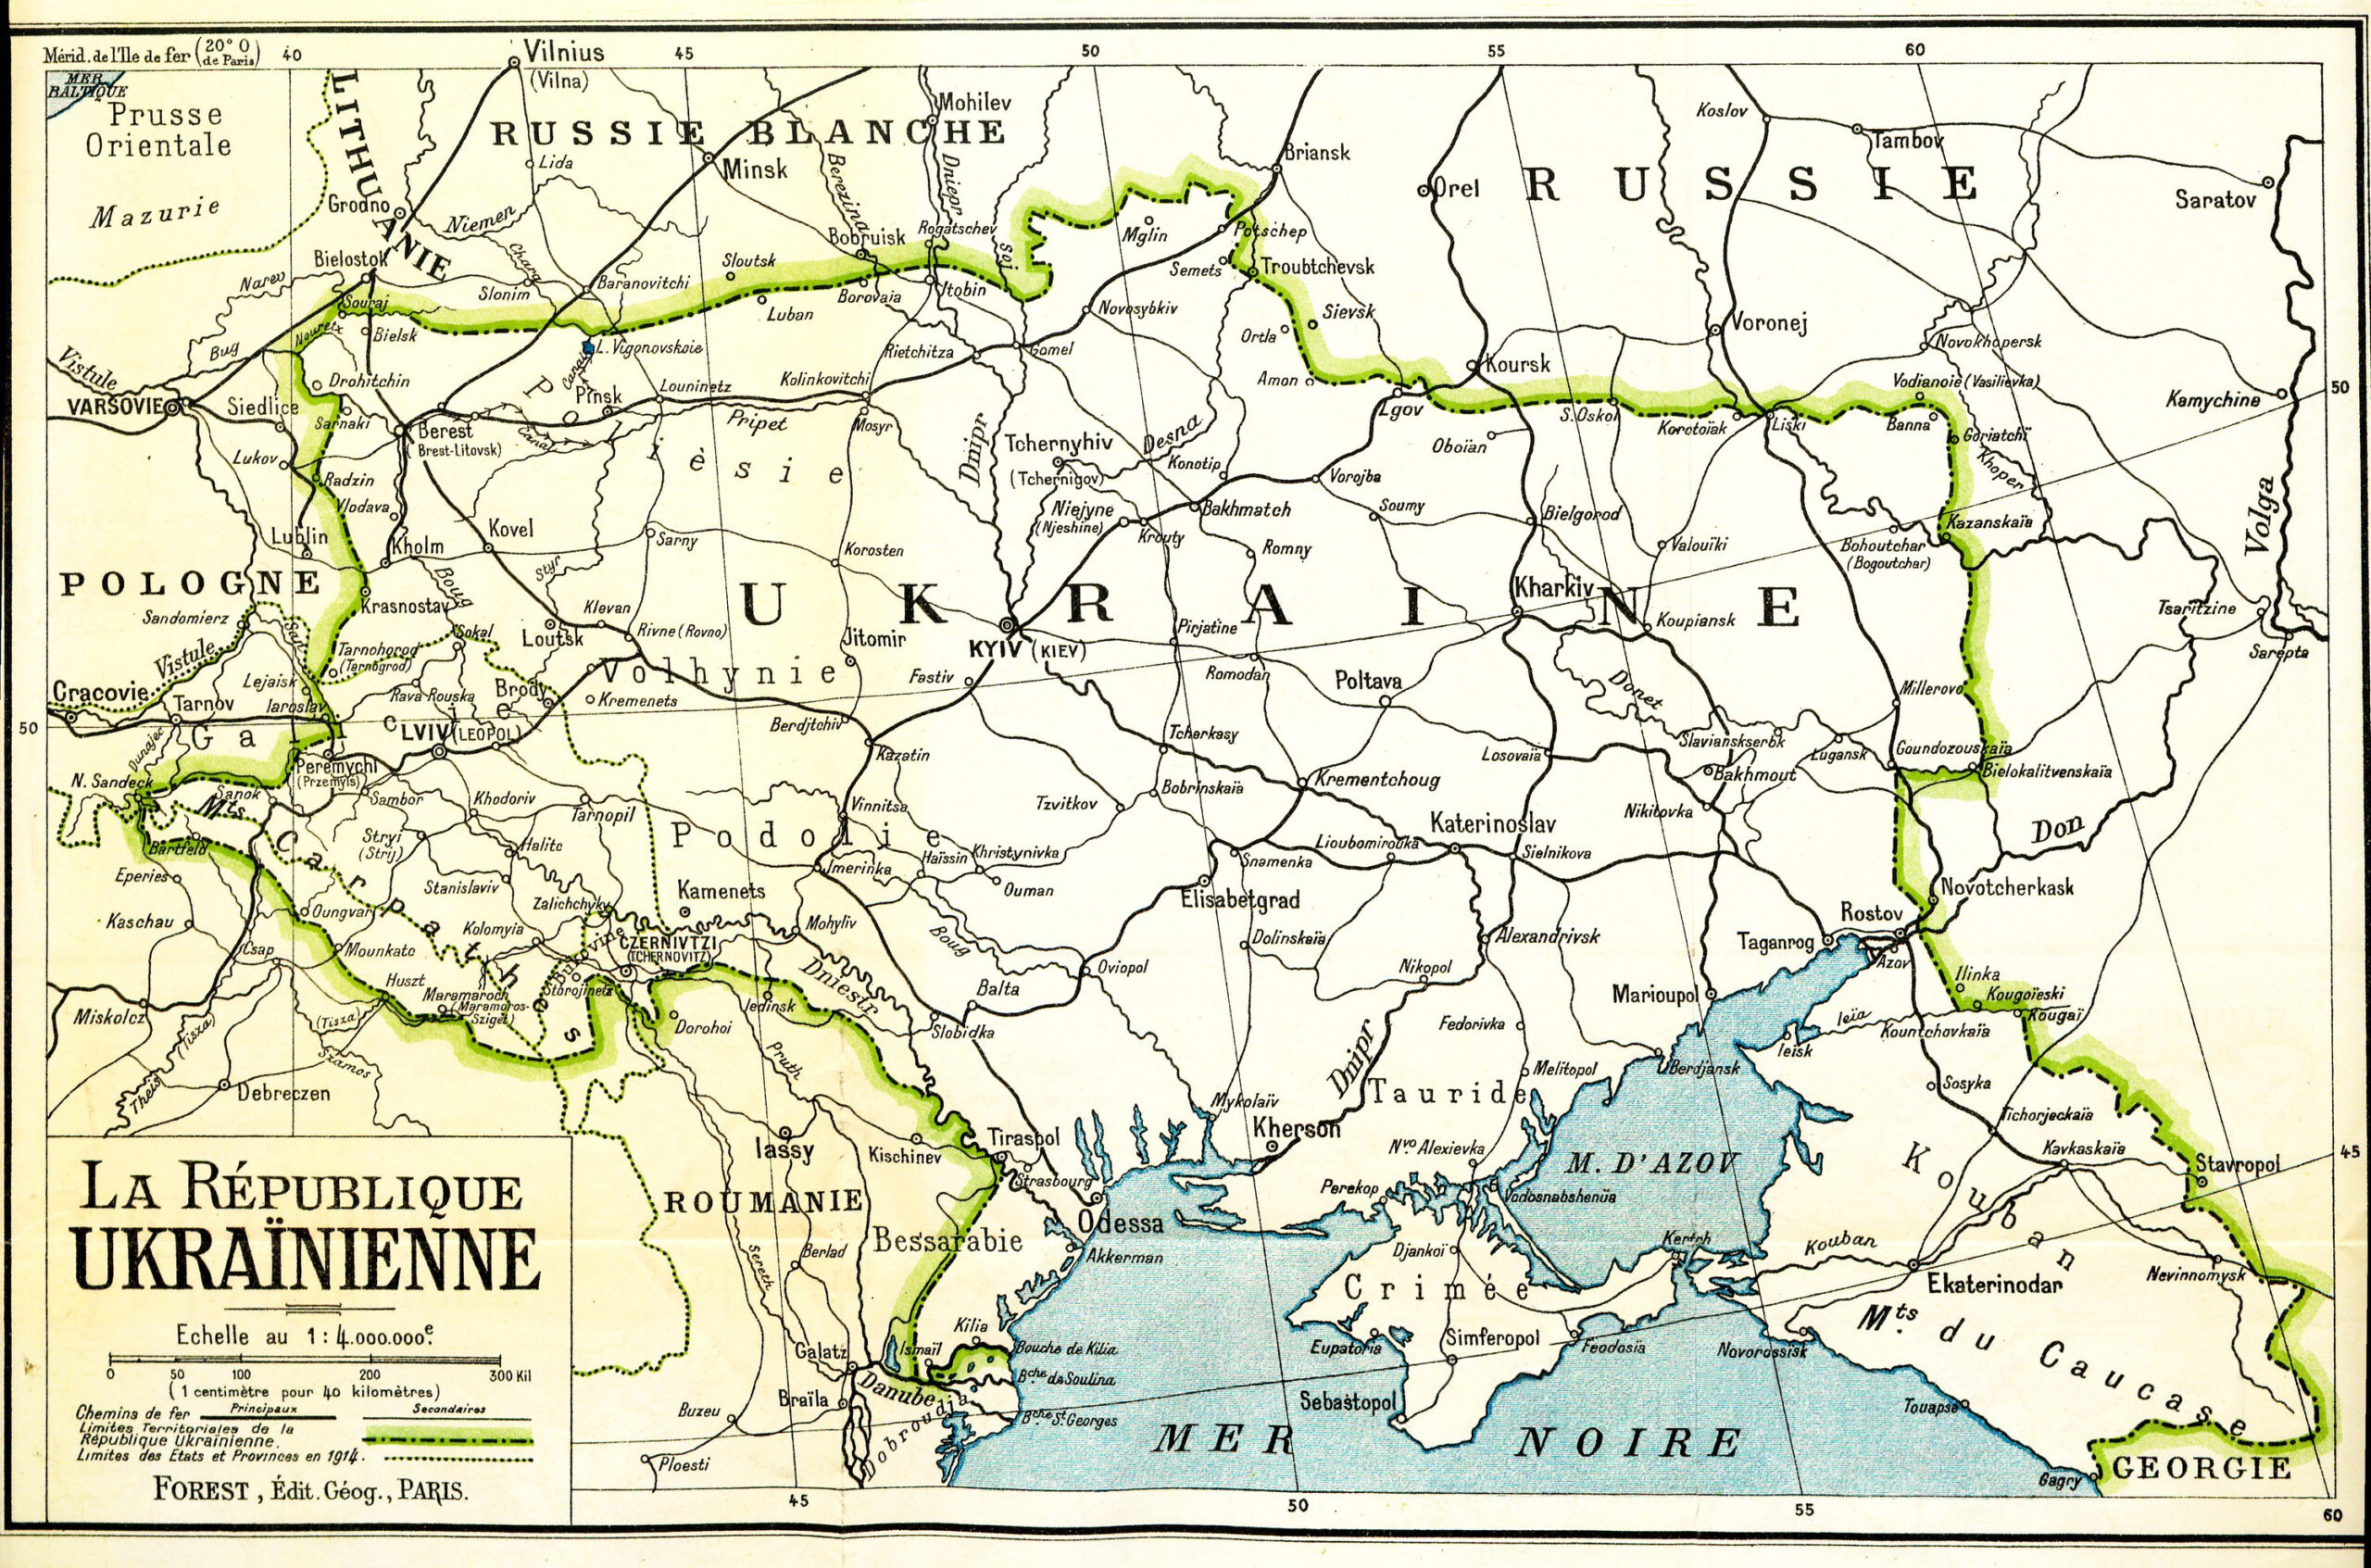 Map of Ukraine, showing the country' proposed borders. Prpared for the Paris Peace Conference at the end of World War I